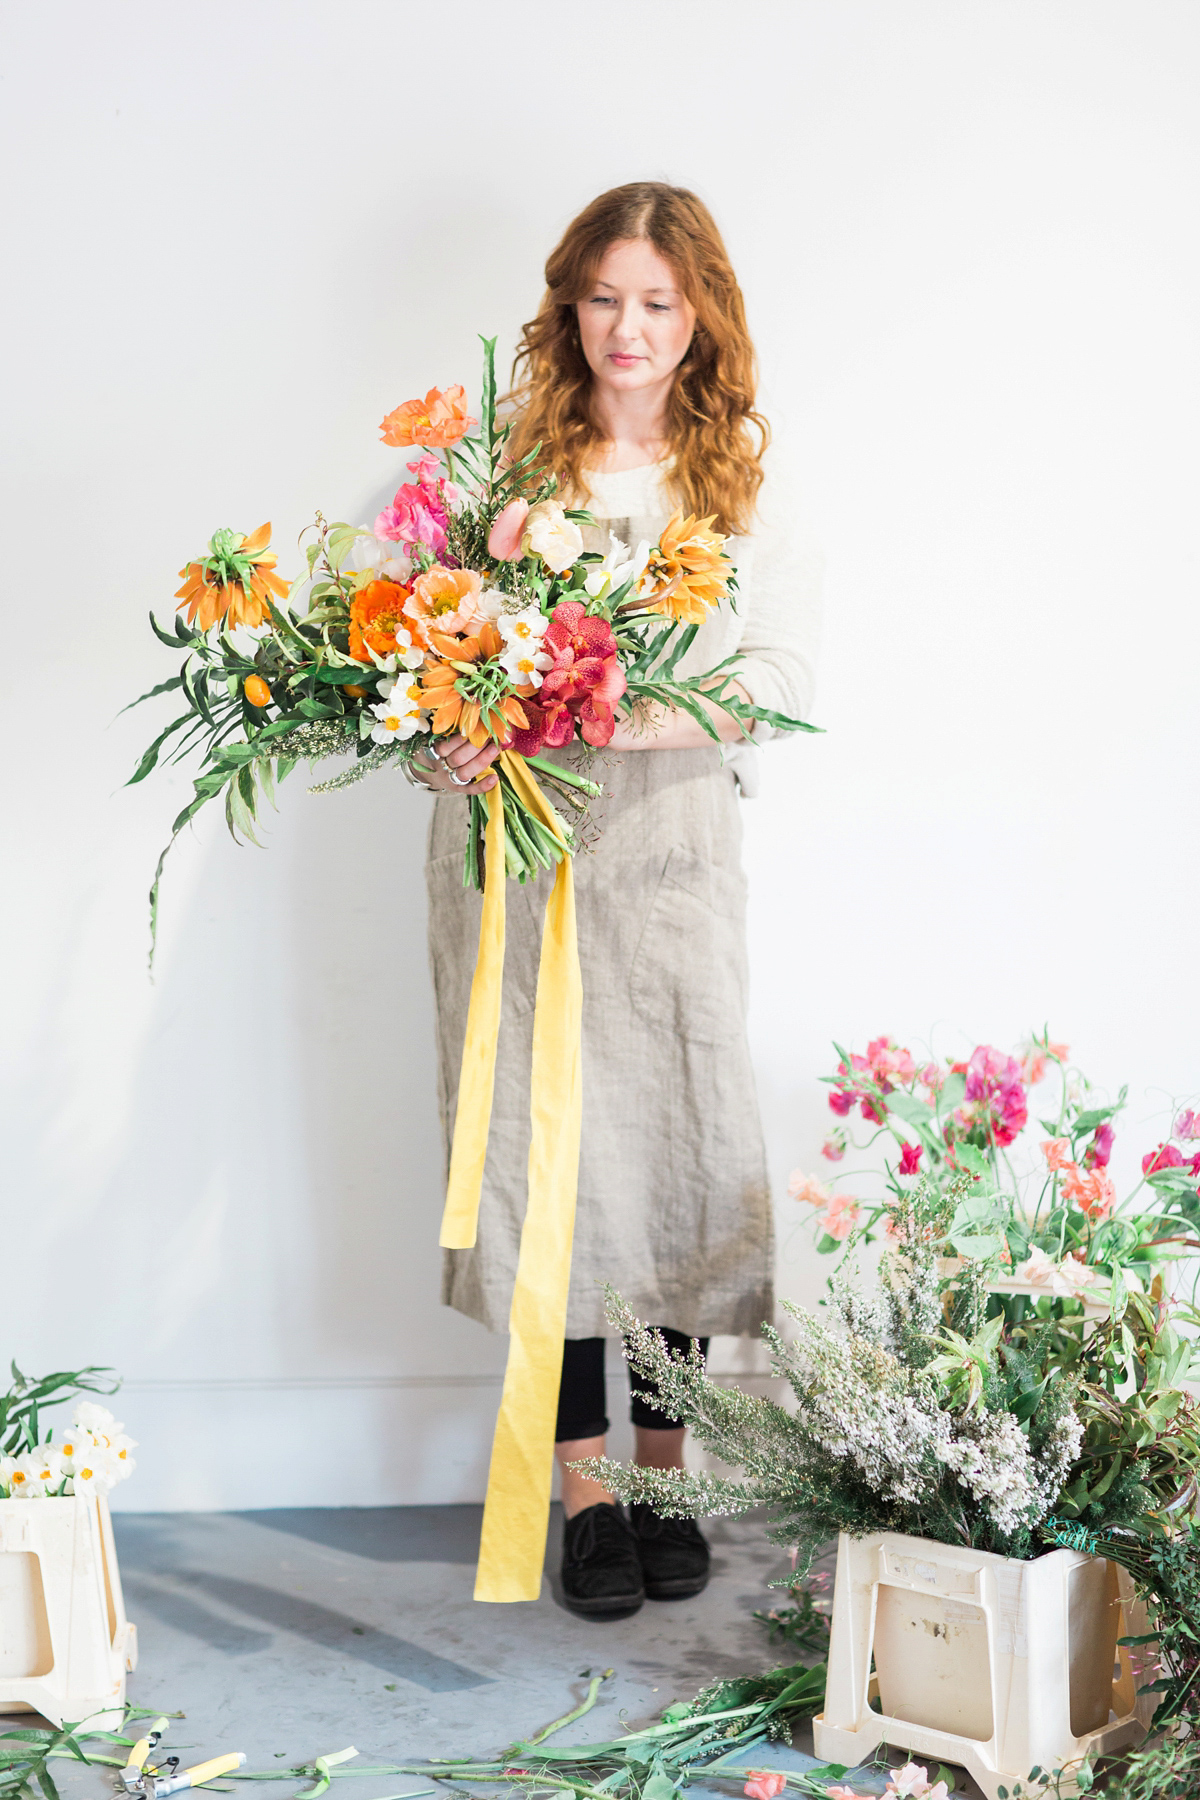 How to design your own wedding bouquet - advice from Georgia of Westwood Design. Images by Sarah Hannam Photography.